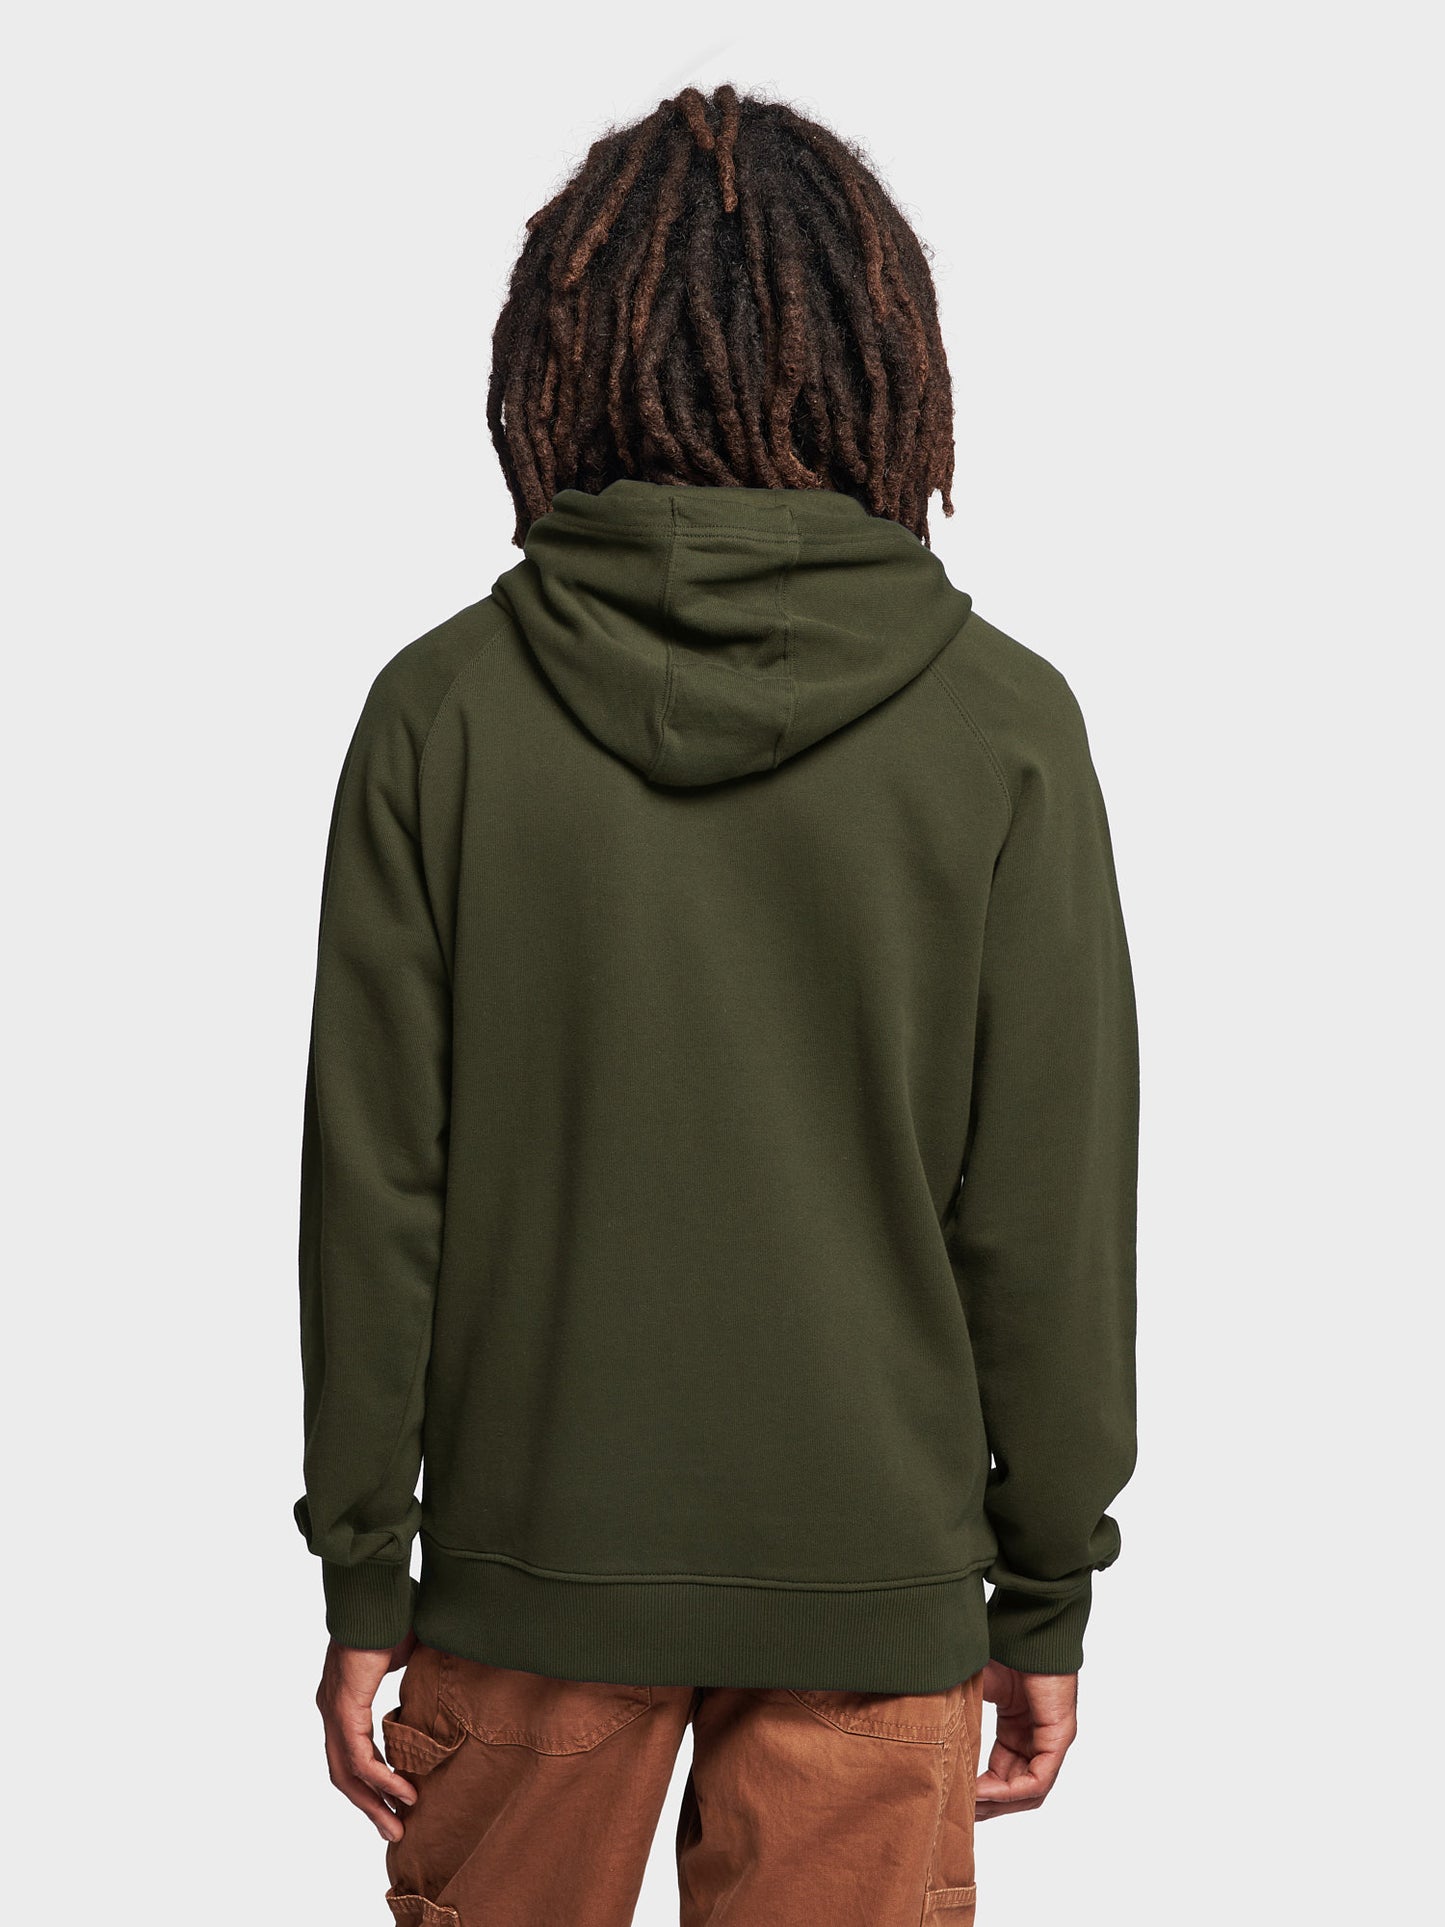 P Bear Hoodie in Forest Night